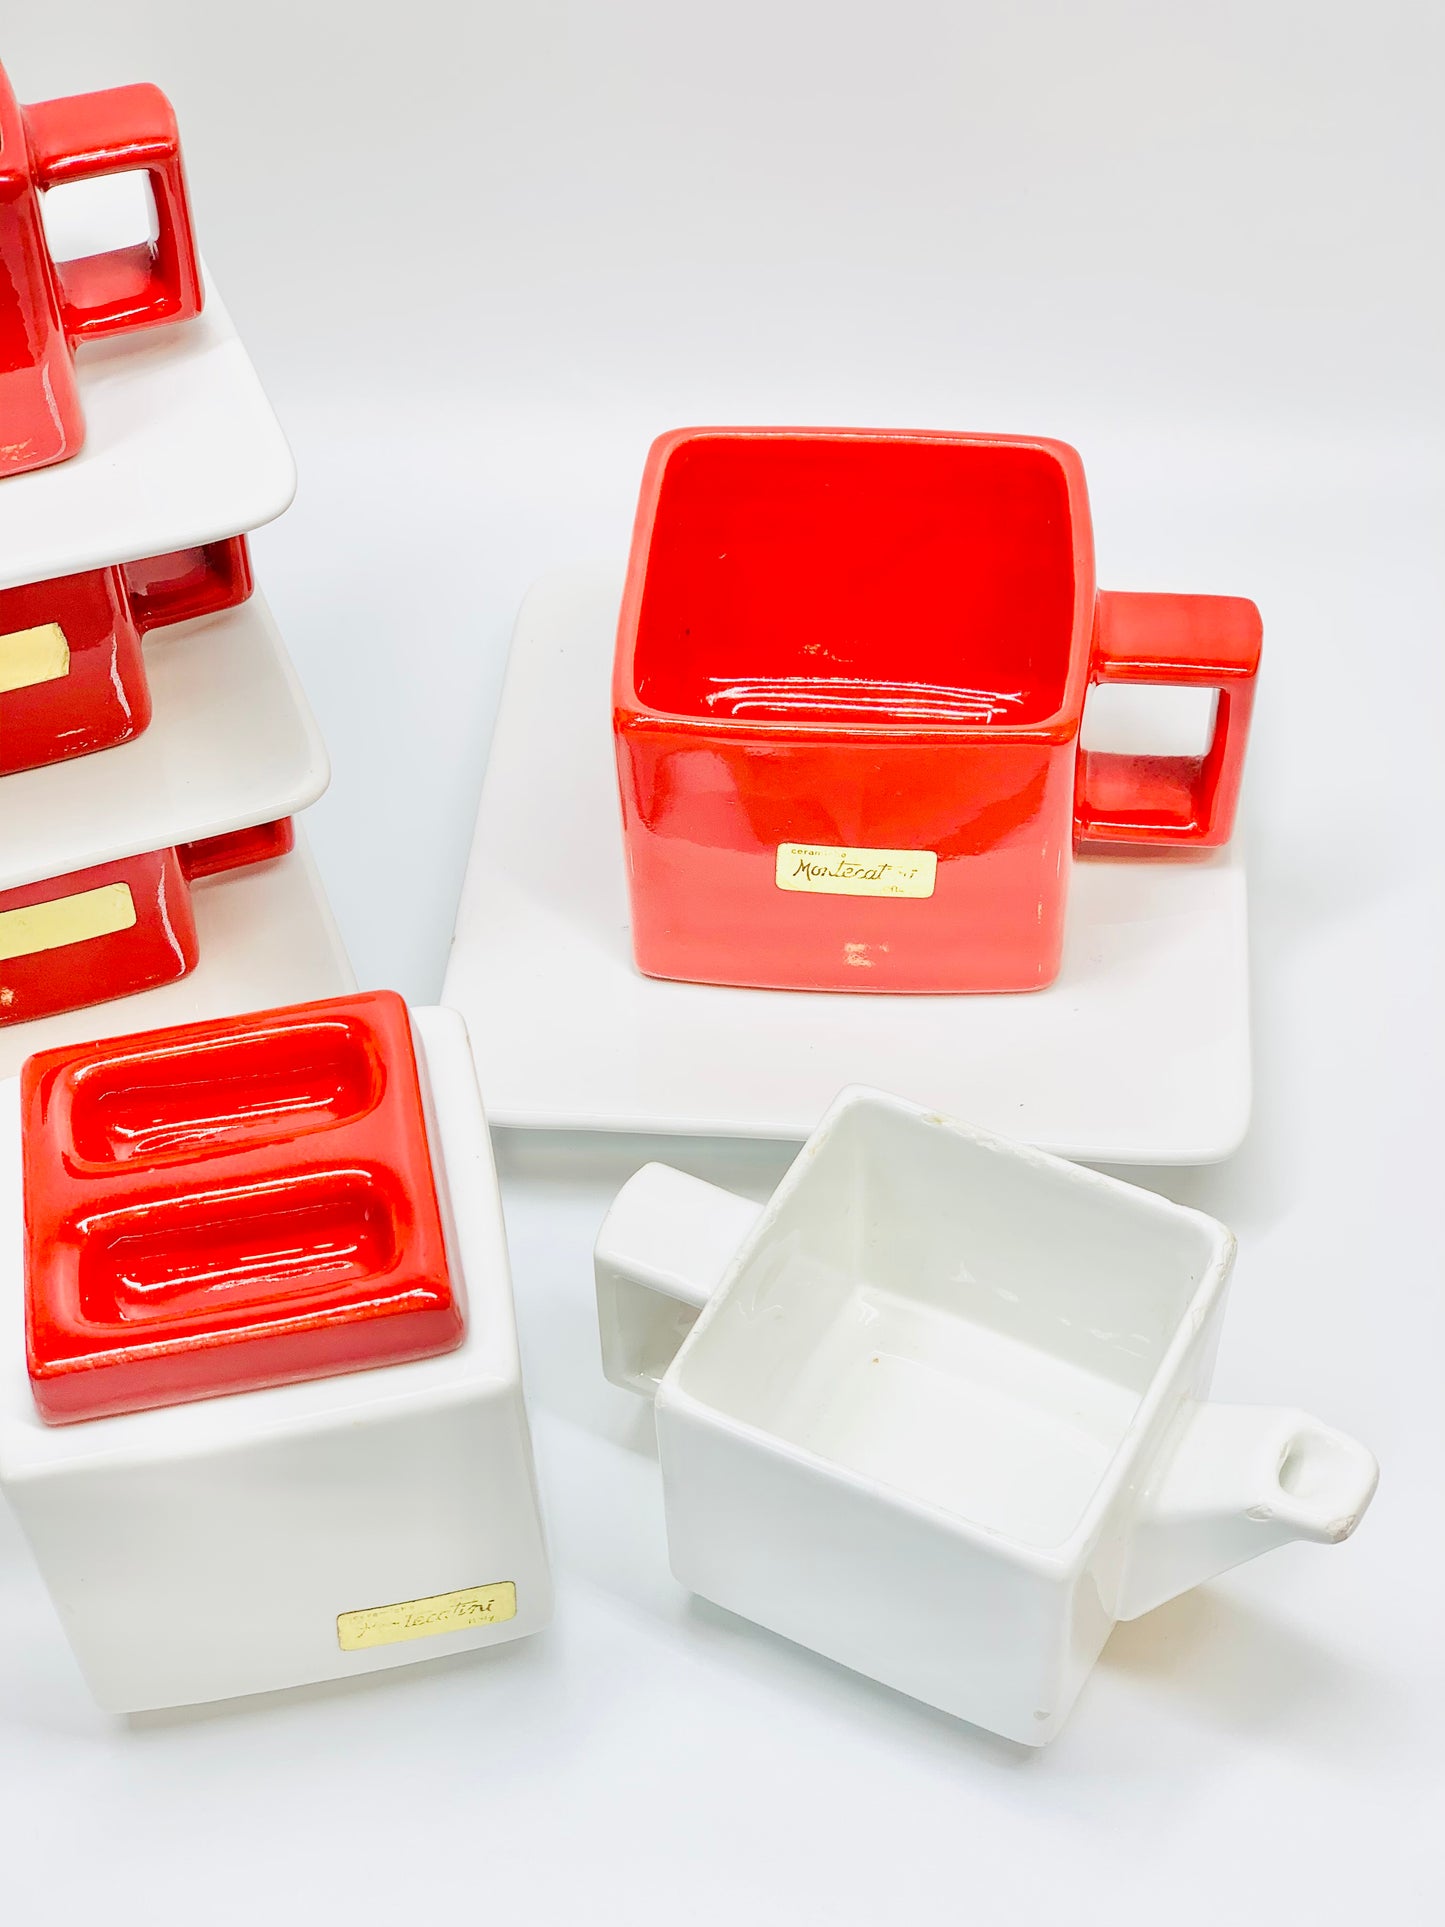 Extremely rare 1970s Red and White Coffee Service from Fratelli Brambilla